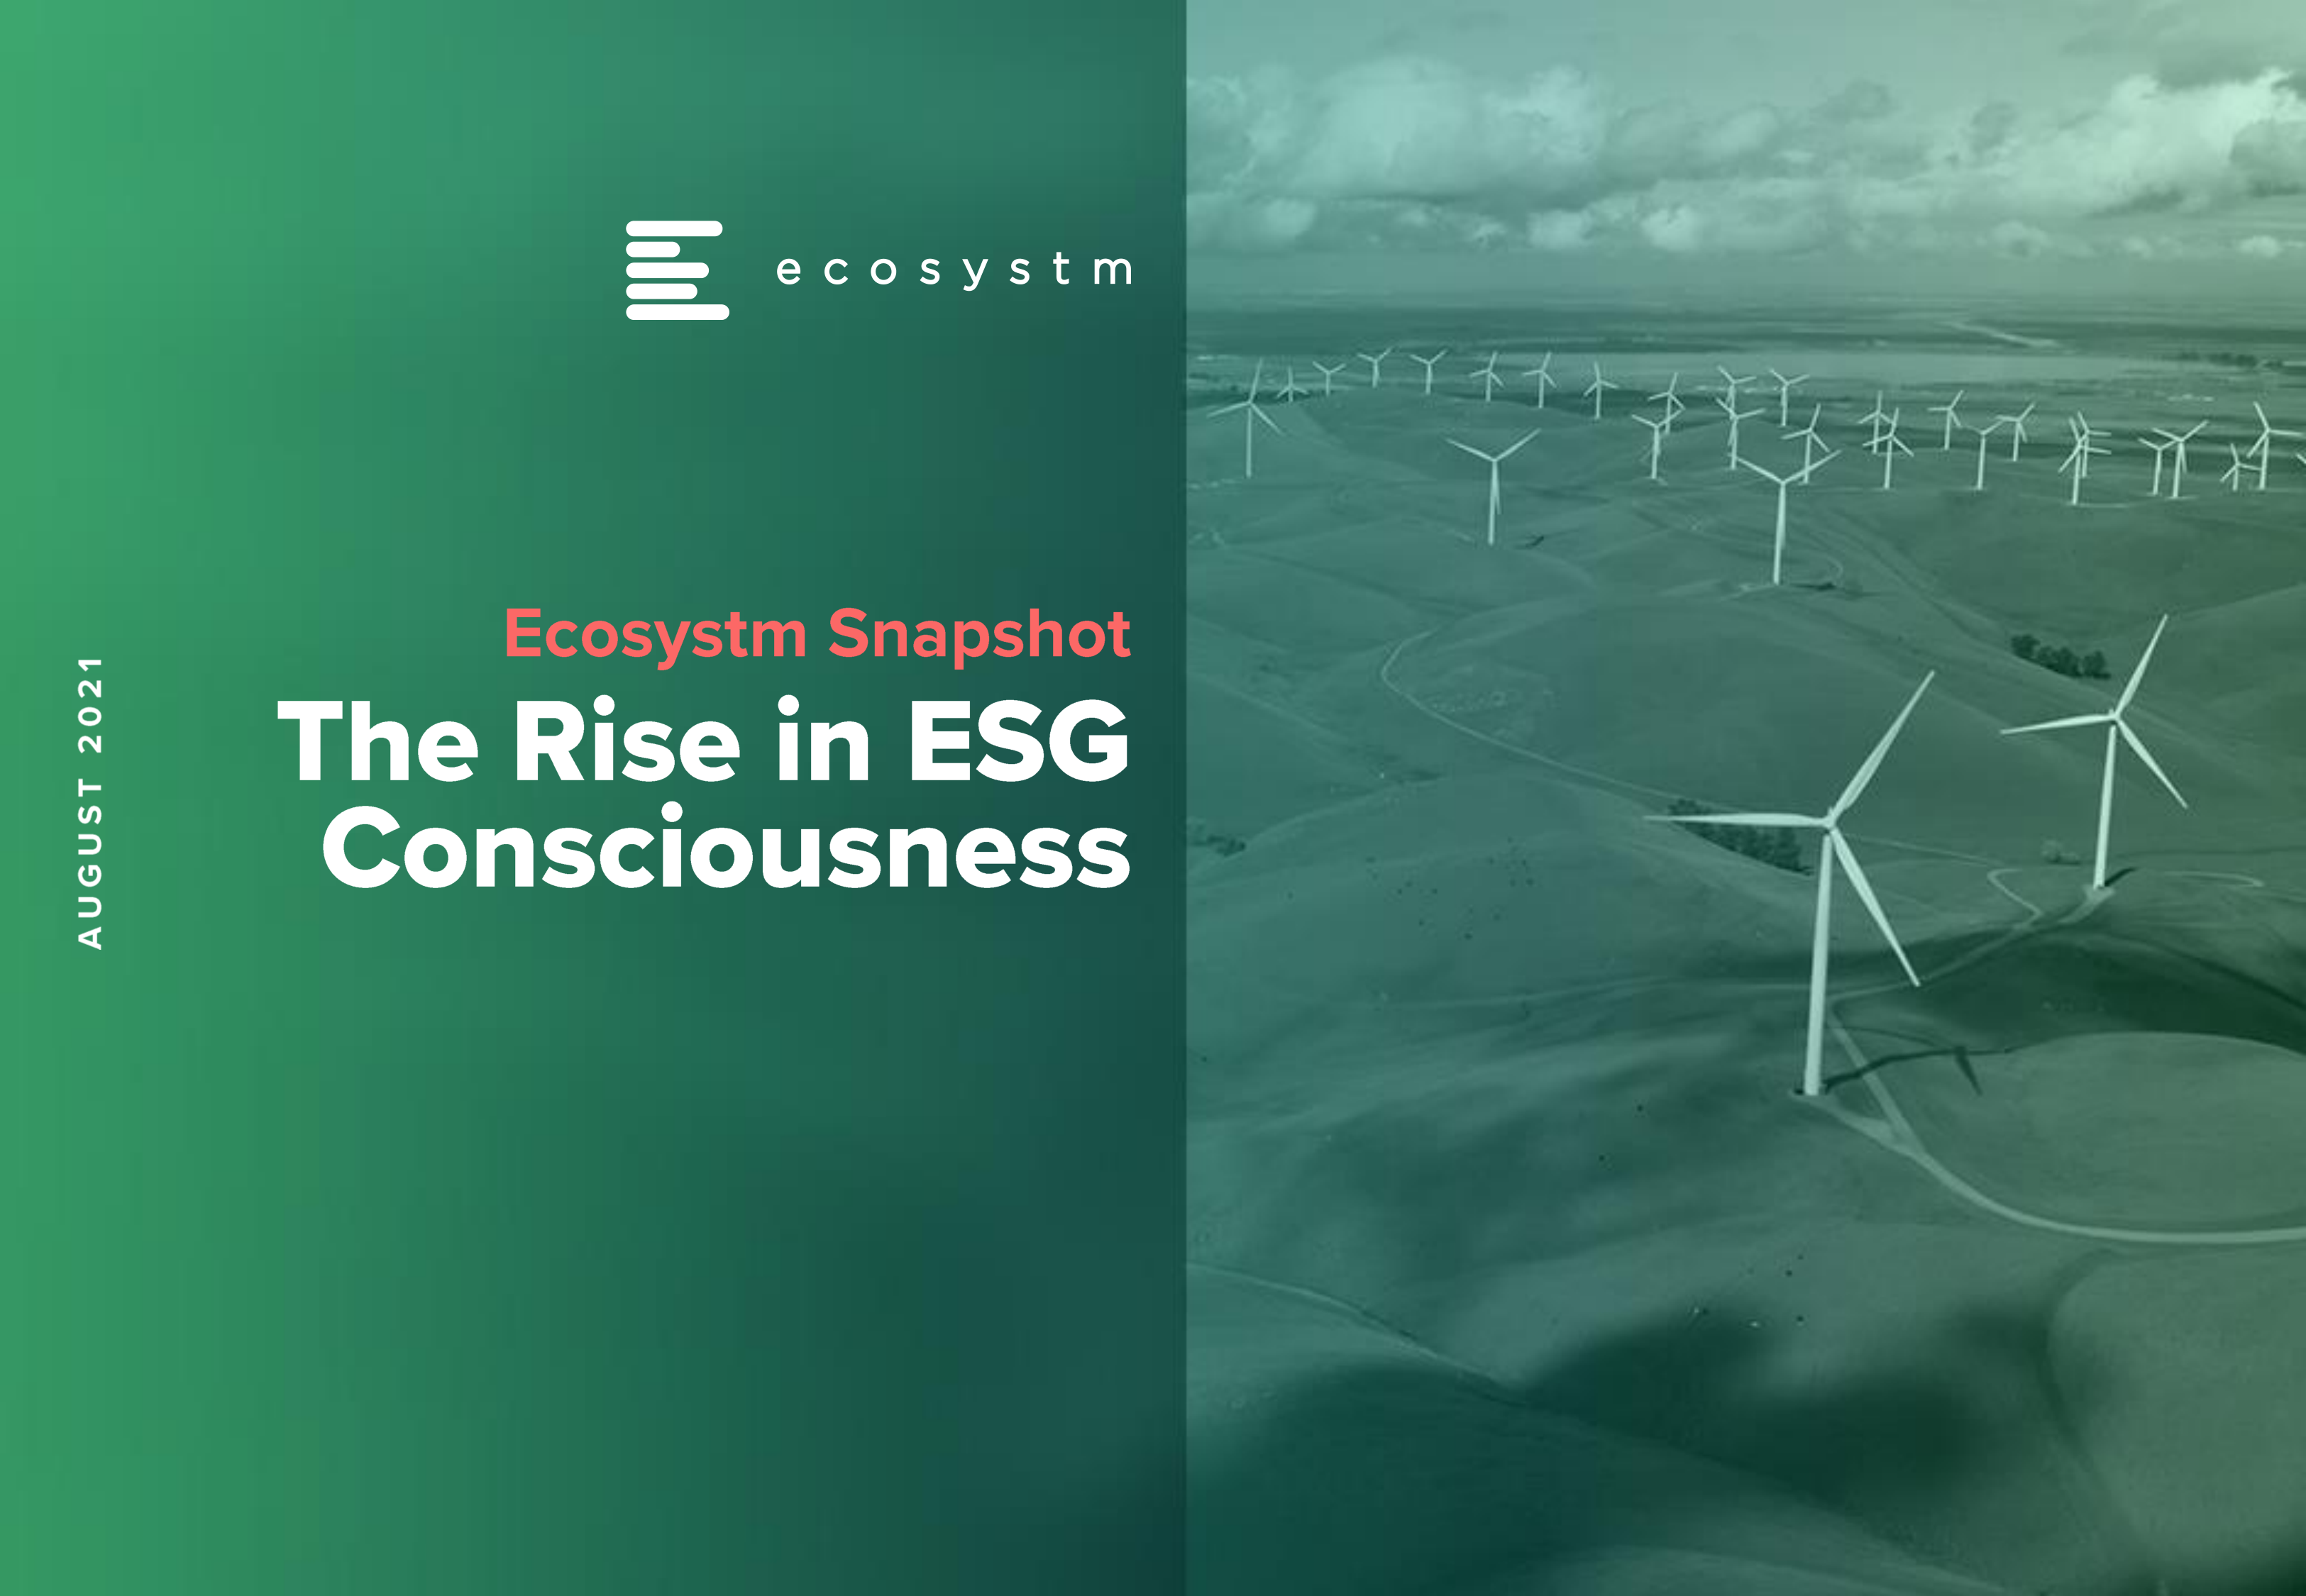 Ecosystm-Snapshot-The-Rise-in-ESG-Consciousness-1